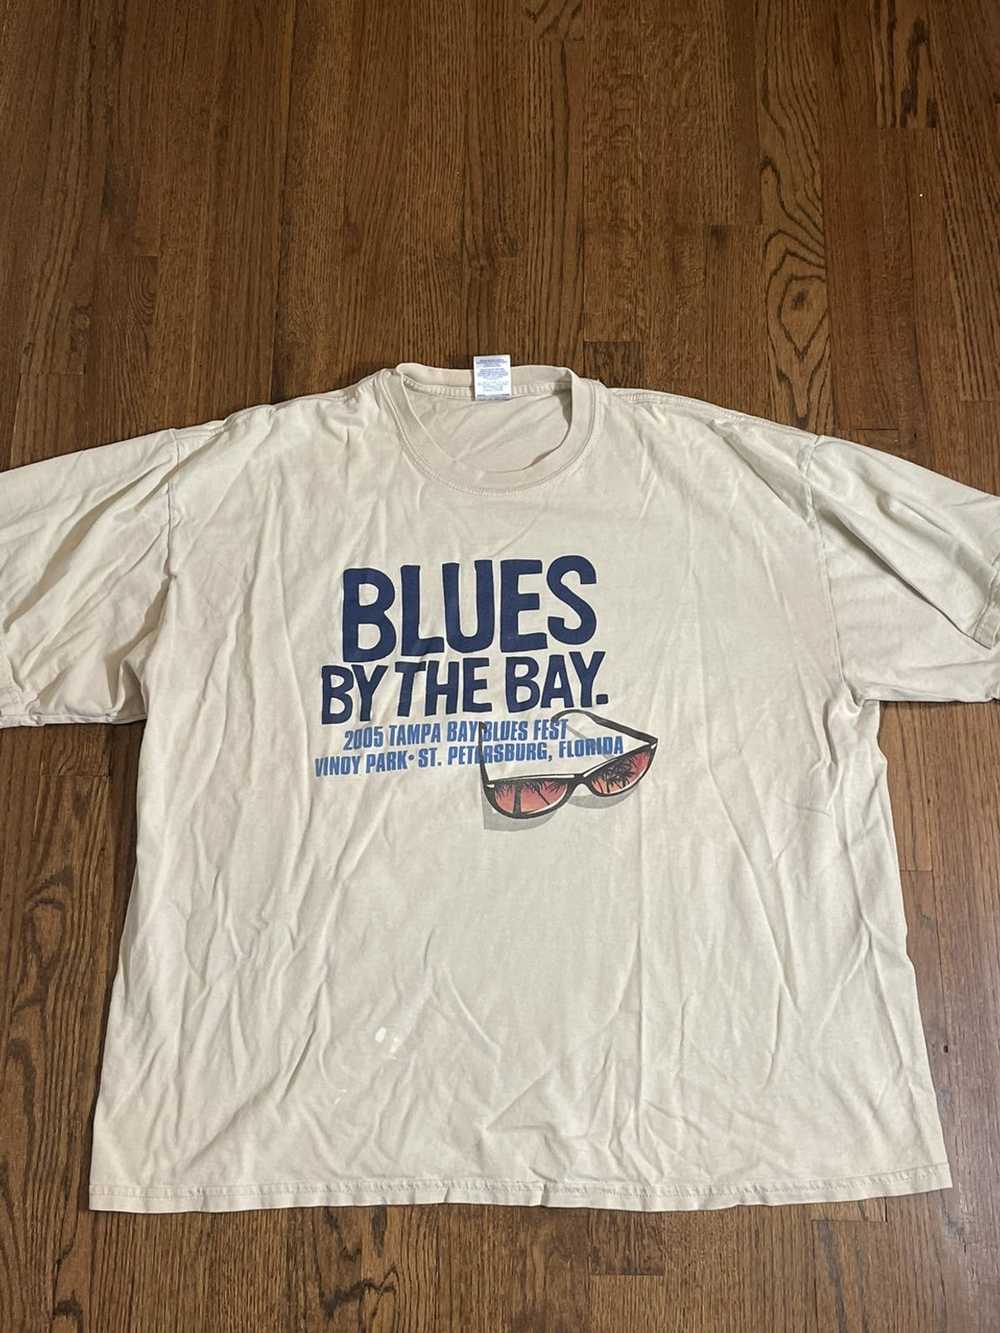 Vintage Vintage Blues By The Bay 2005 T-Shirt - image 1